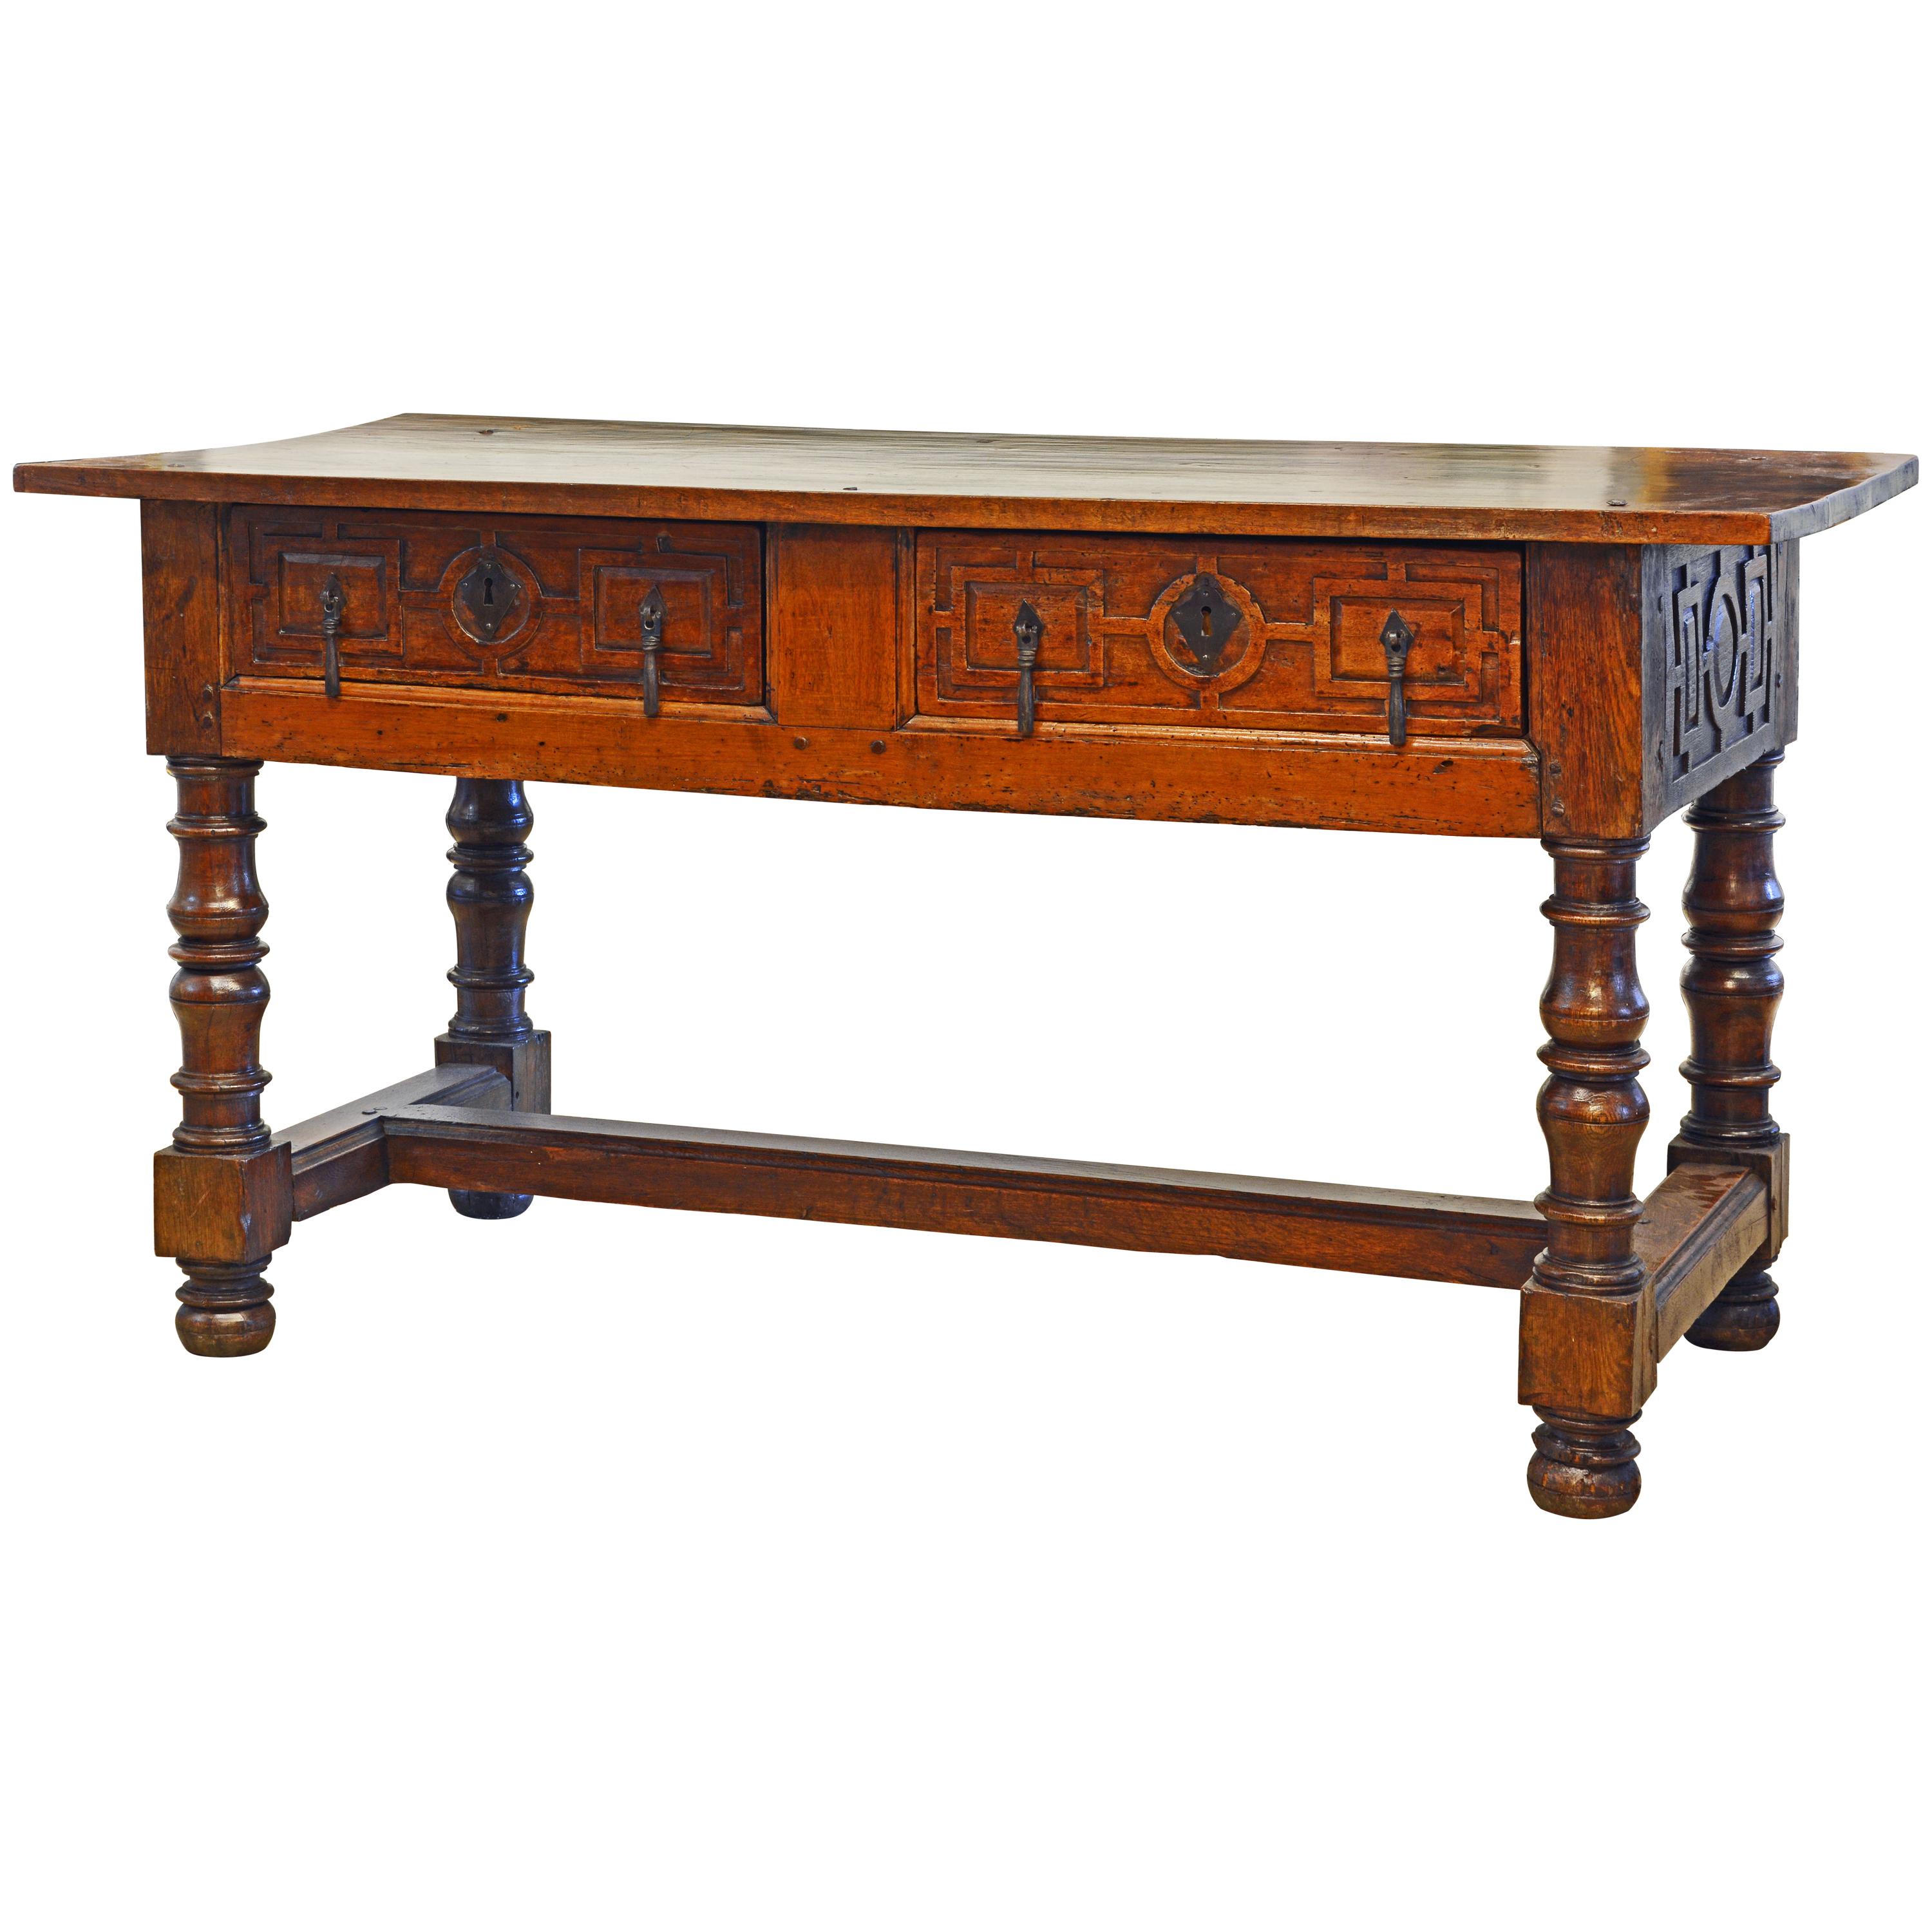 Large 17th-18th Century Spanish Renaissance Walnut Refectory Table or Hall Table